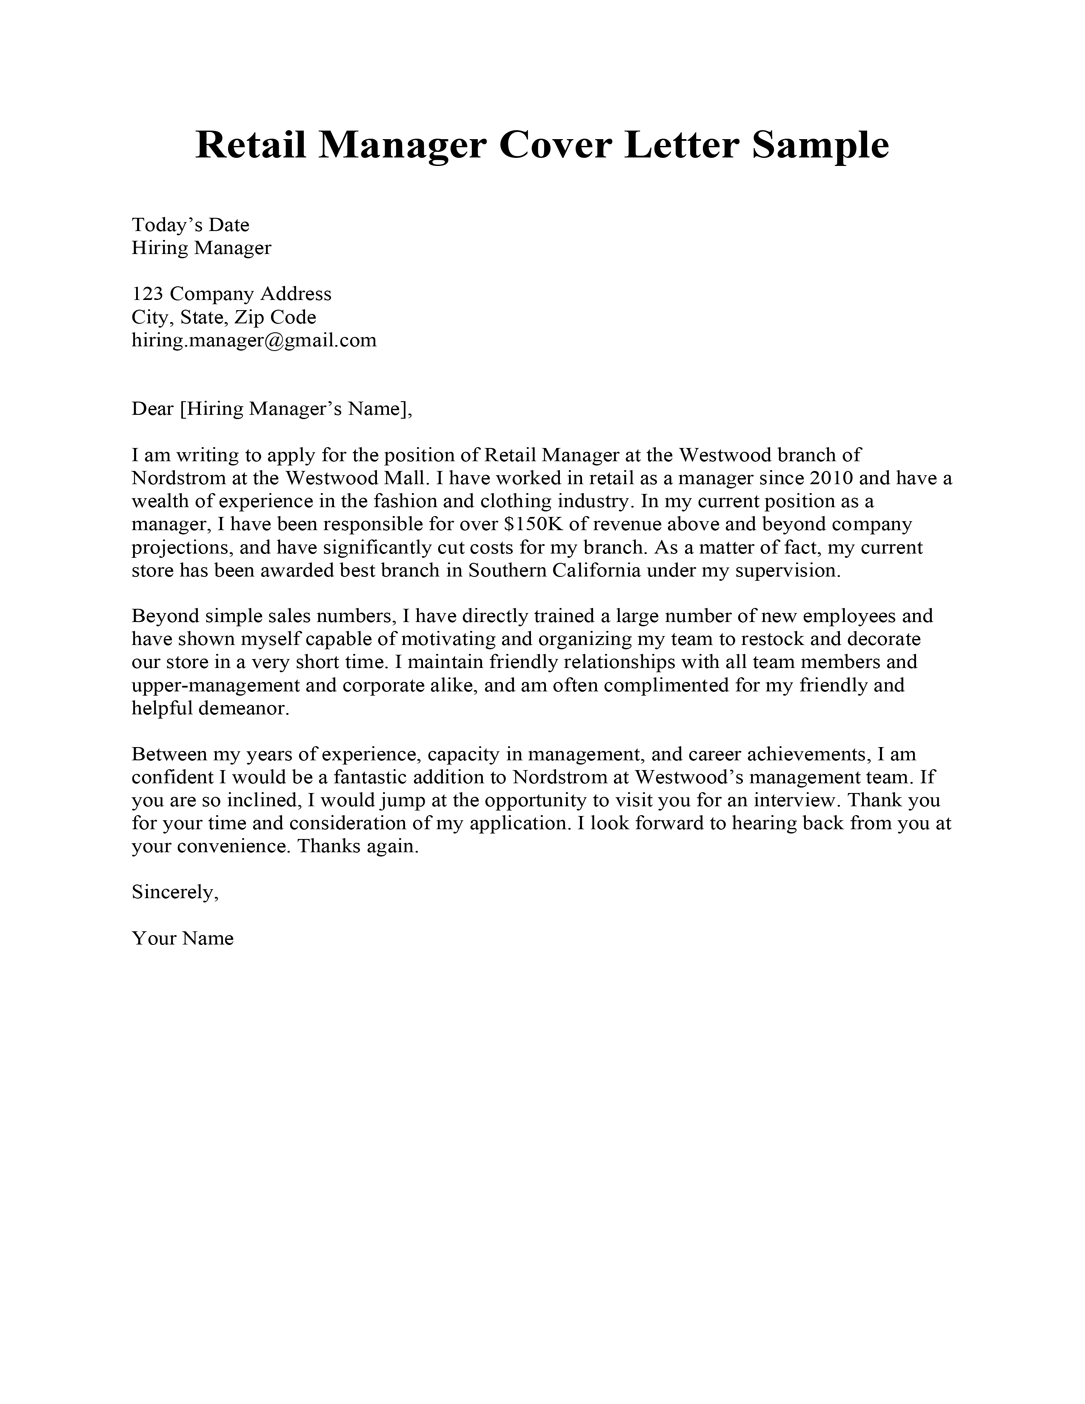 Sample Retail Cover Letter from resumecompanion.com